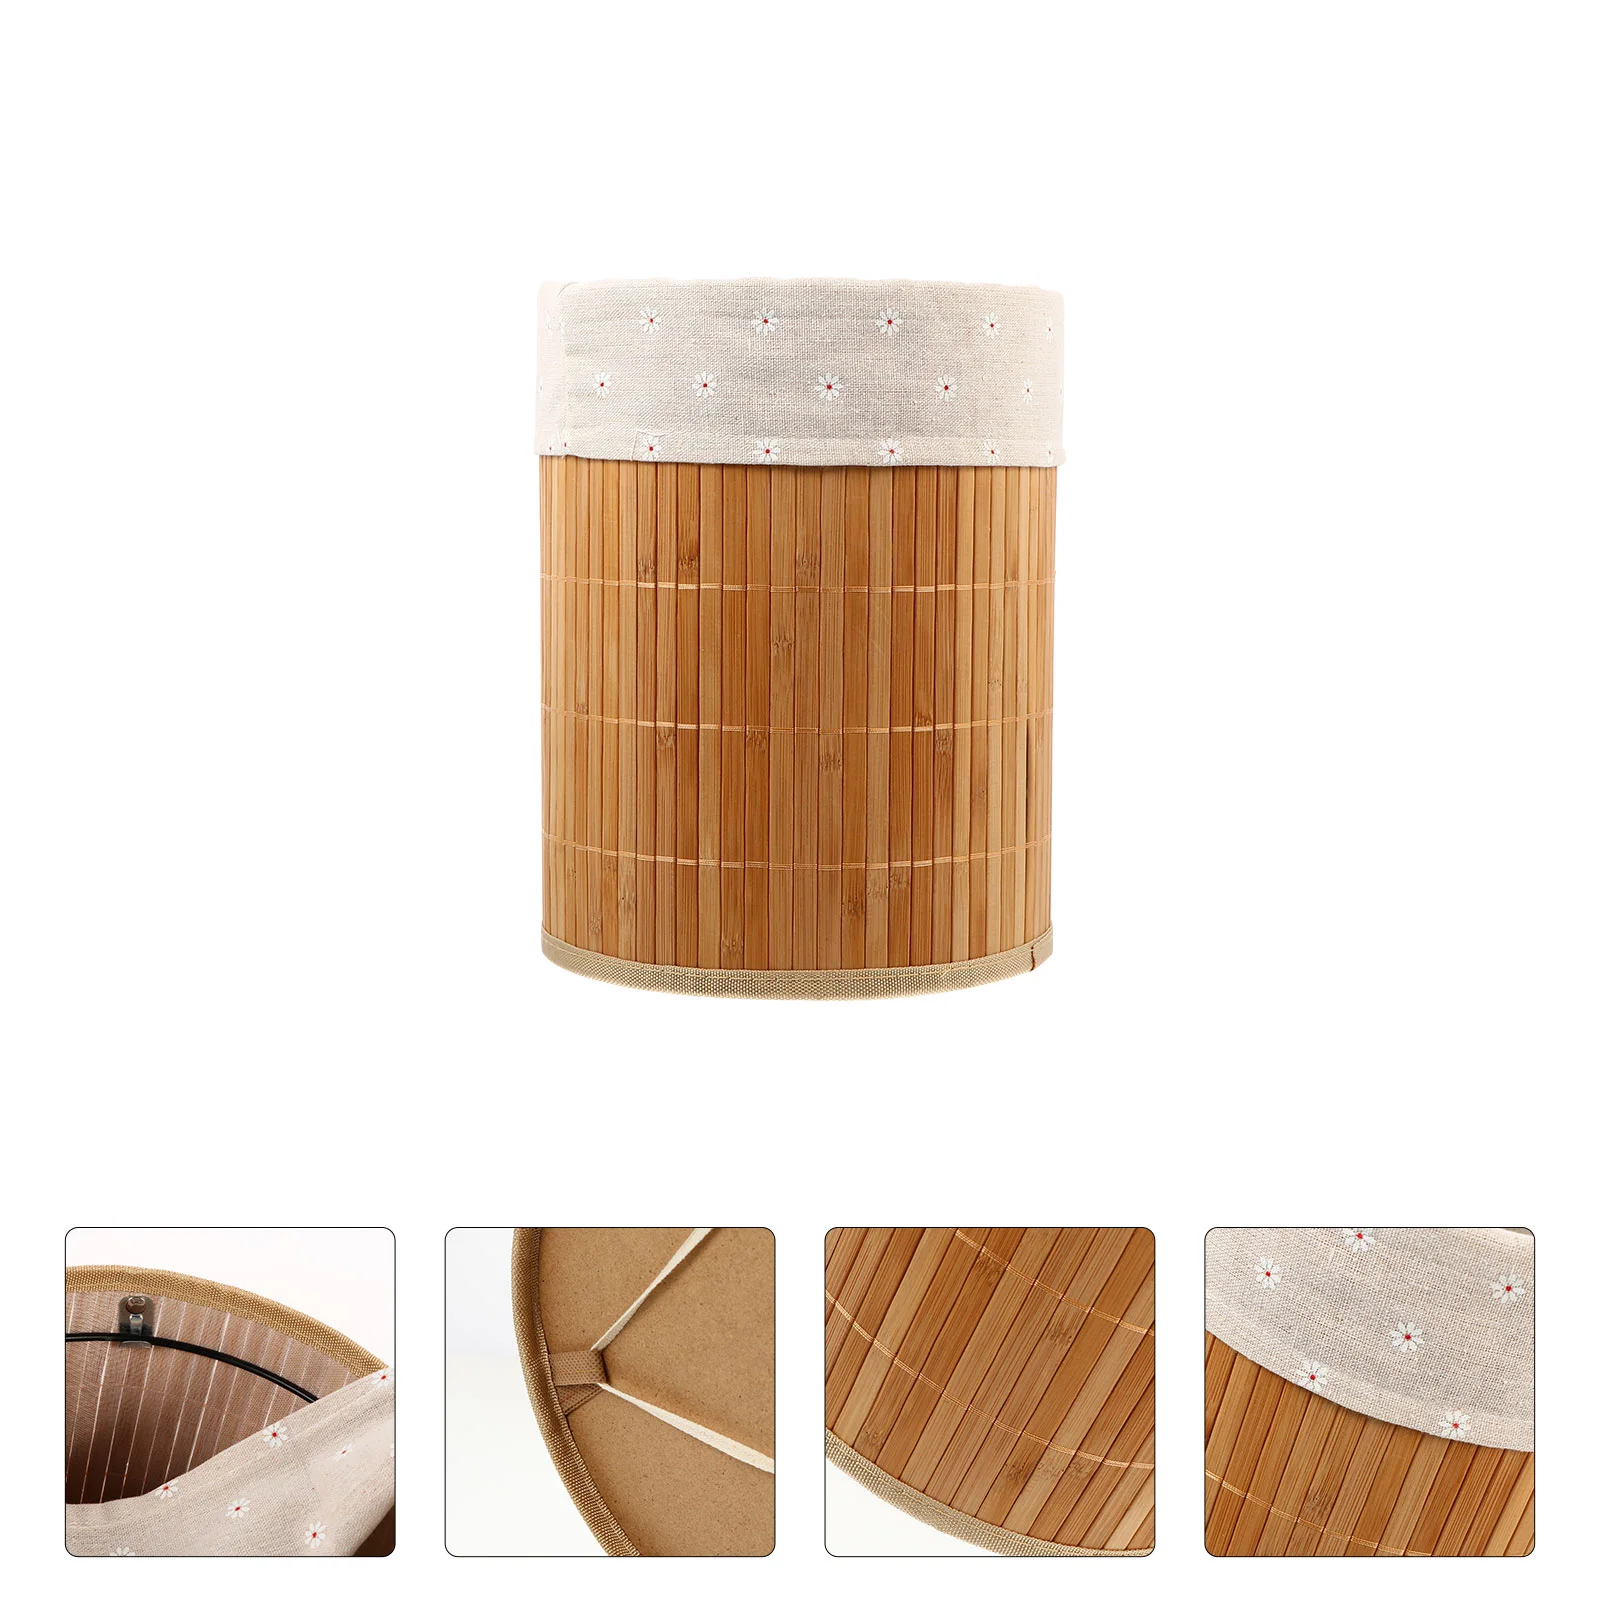 

Storage Basket Bamboo Clothes Baskets Laundry Woven Organizer Hamper Bucket Bins Wicker Dirty Natural Weaving Large Rope Rattan